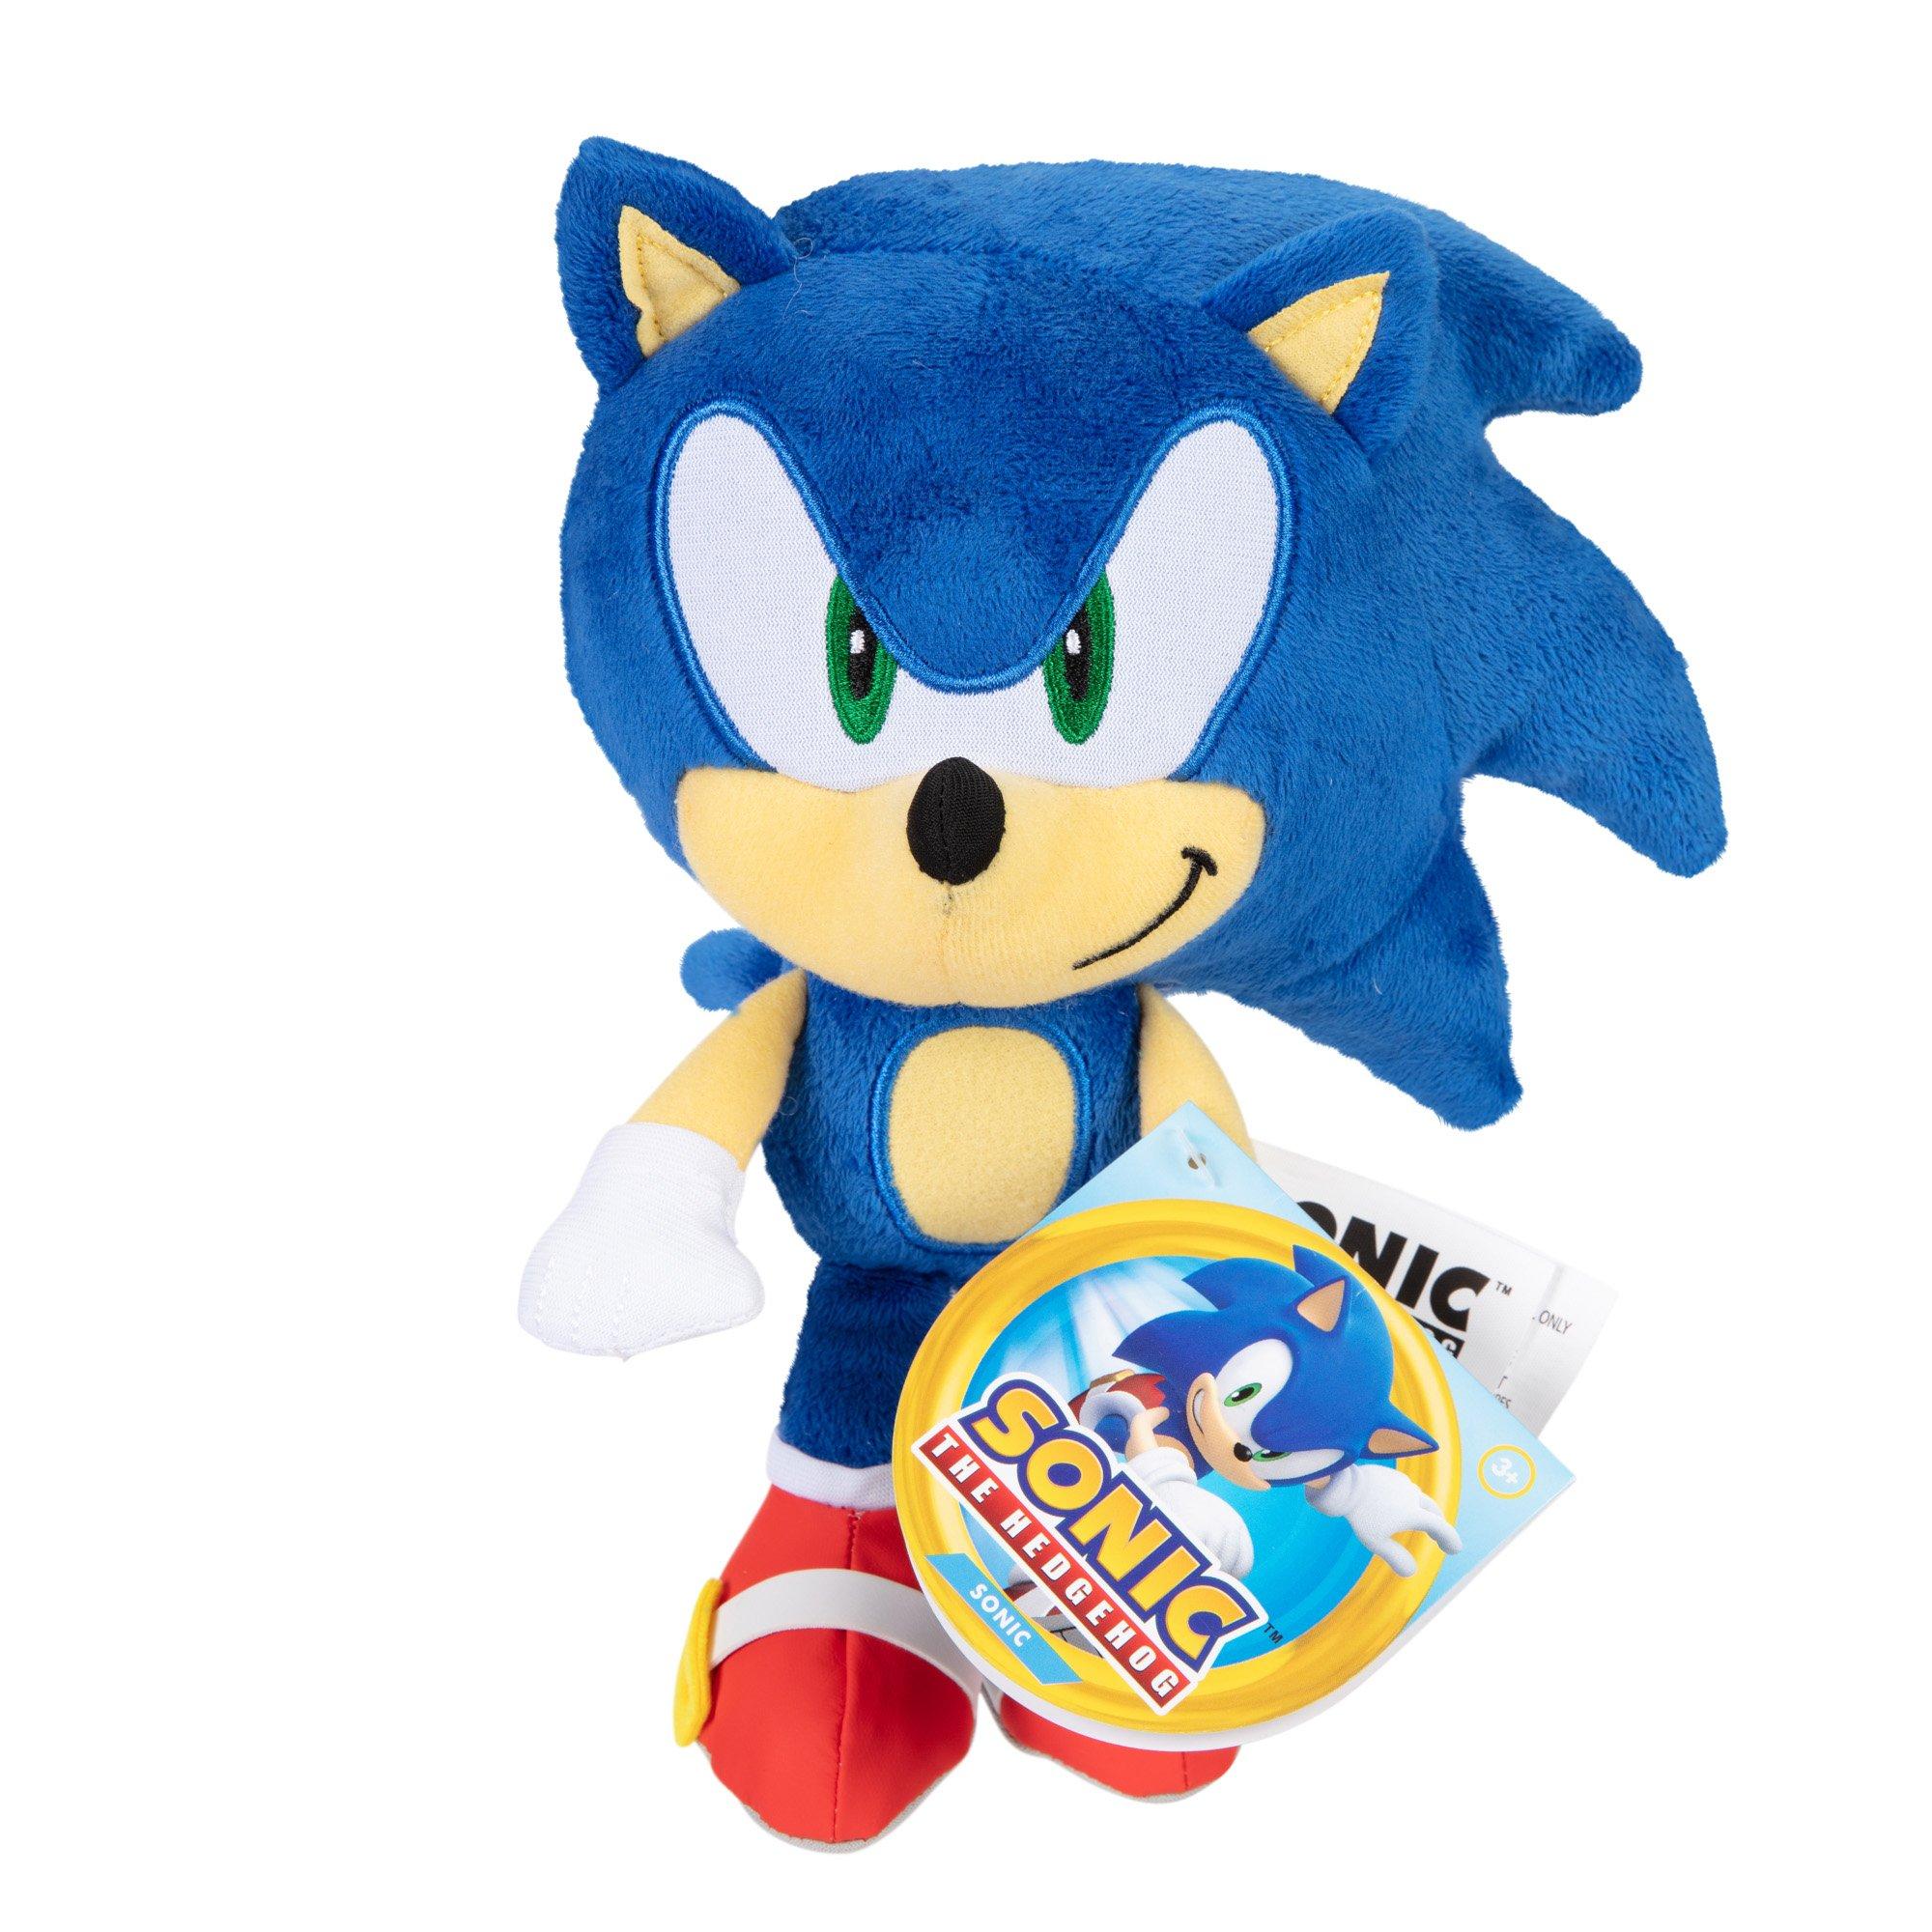 Jakks Pacific Sonic the Hedgehog 9-in Plush (Styles May Vary)